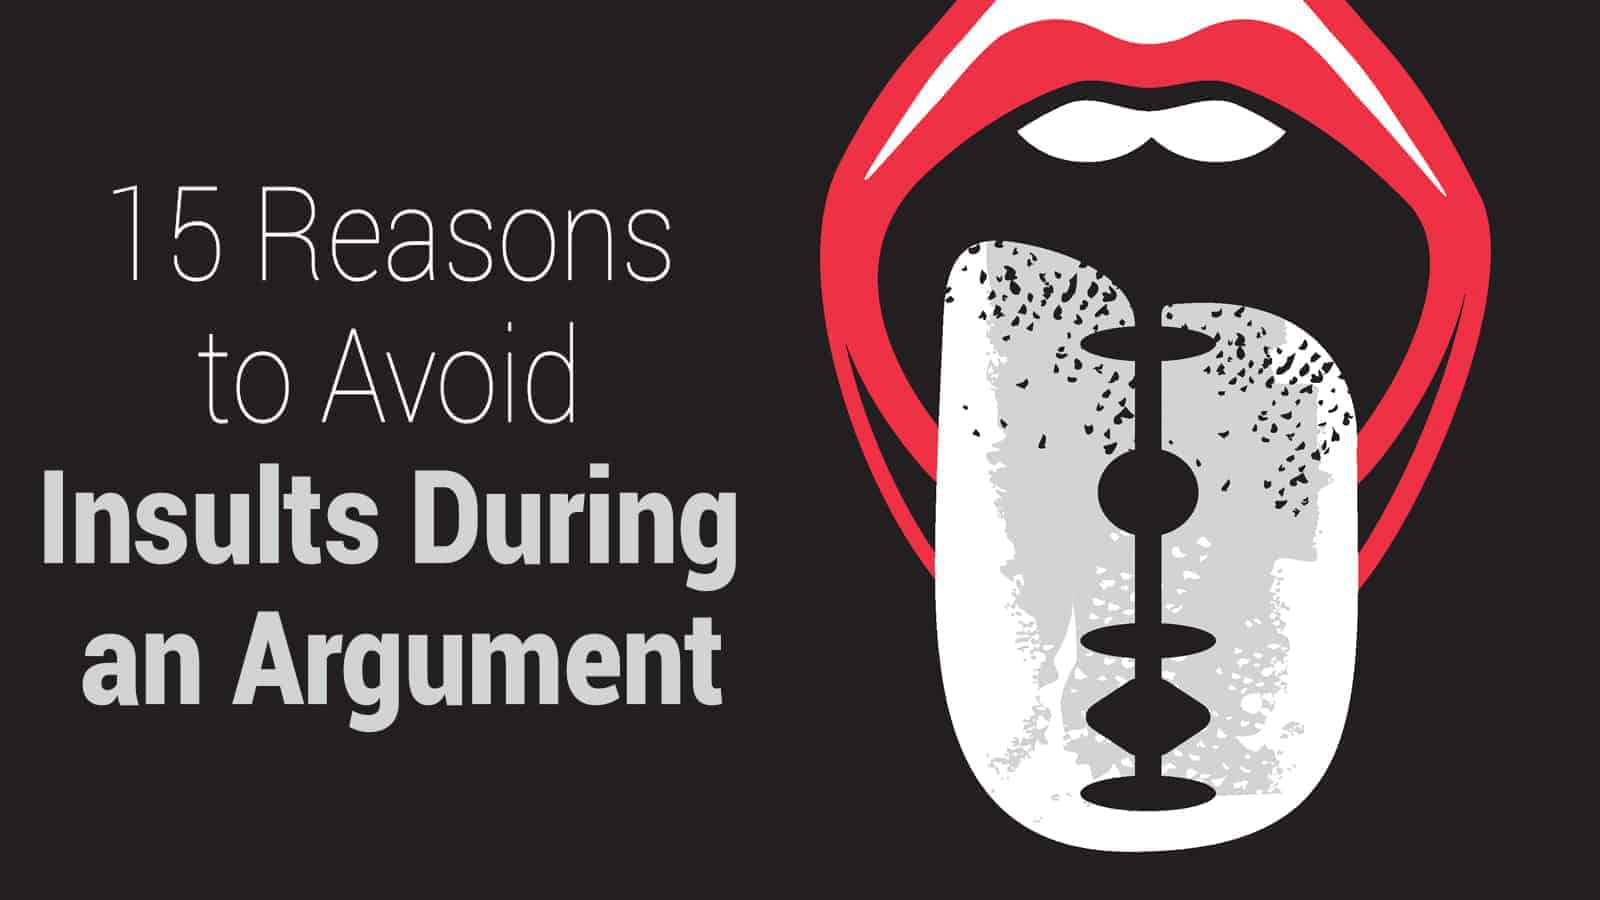 15 Reasons to Avoid Insults During an Argument